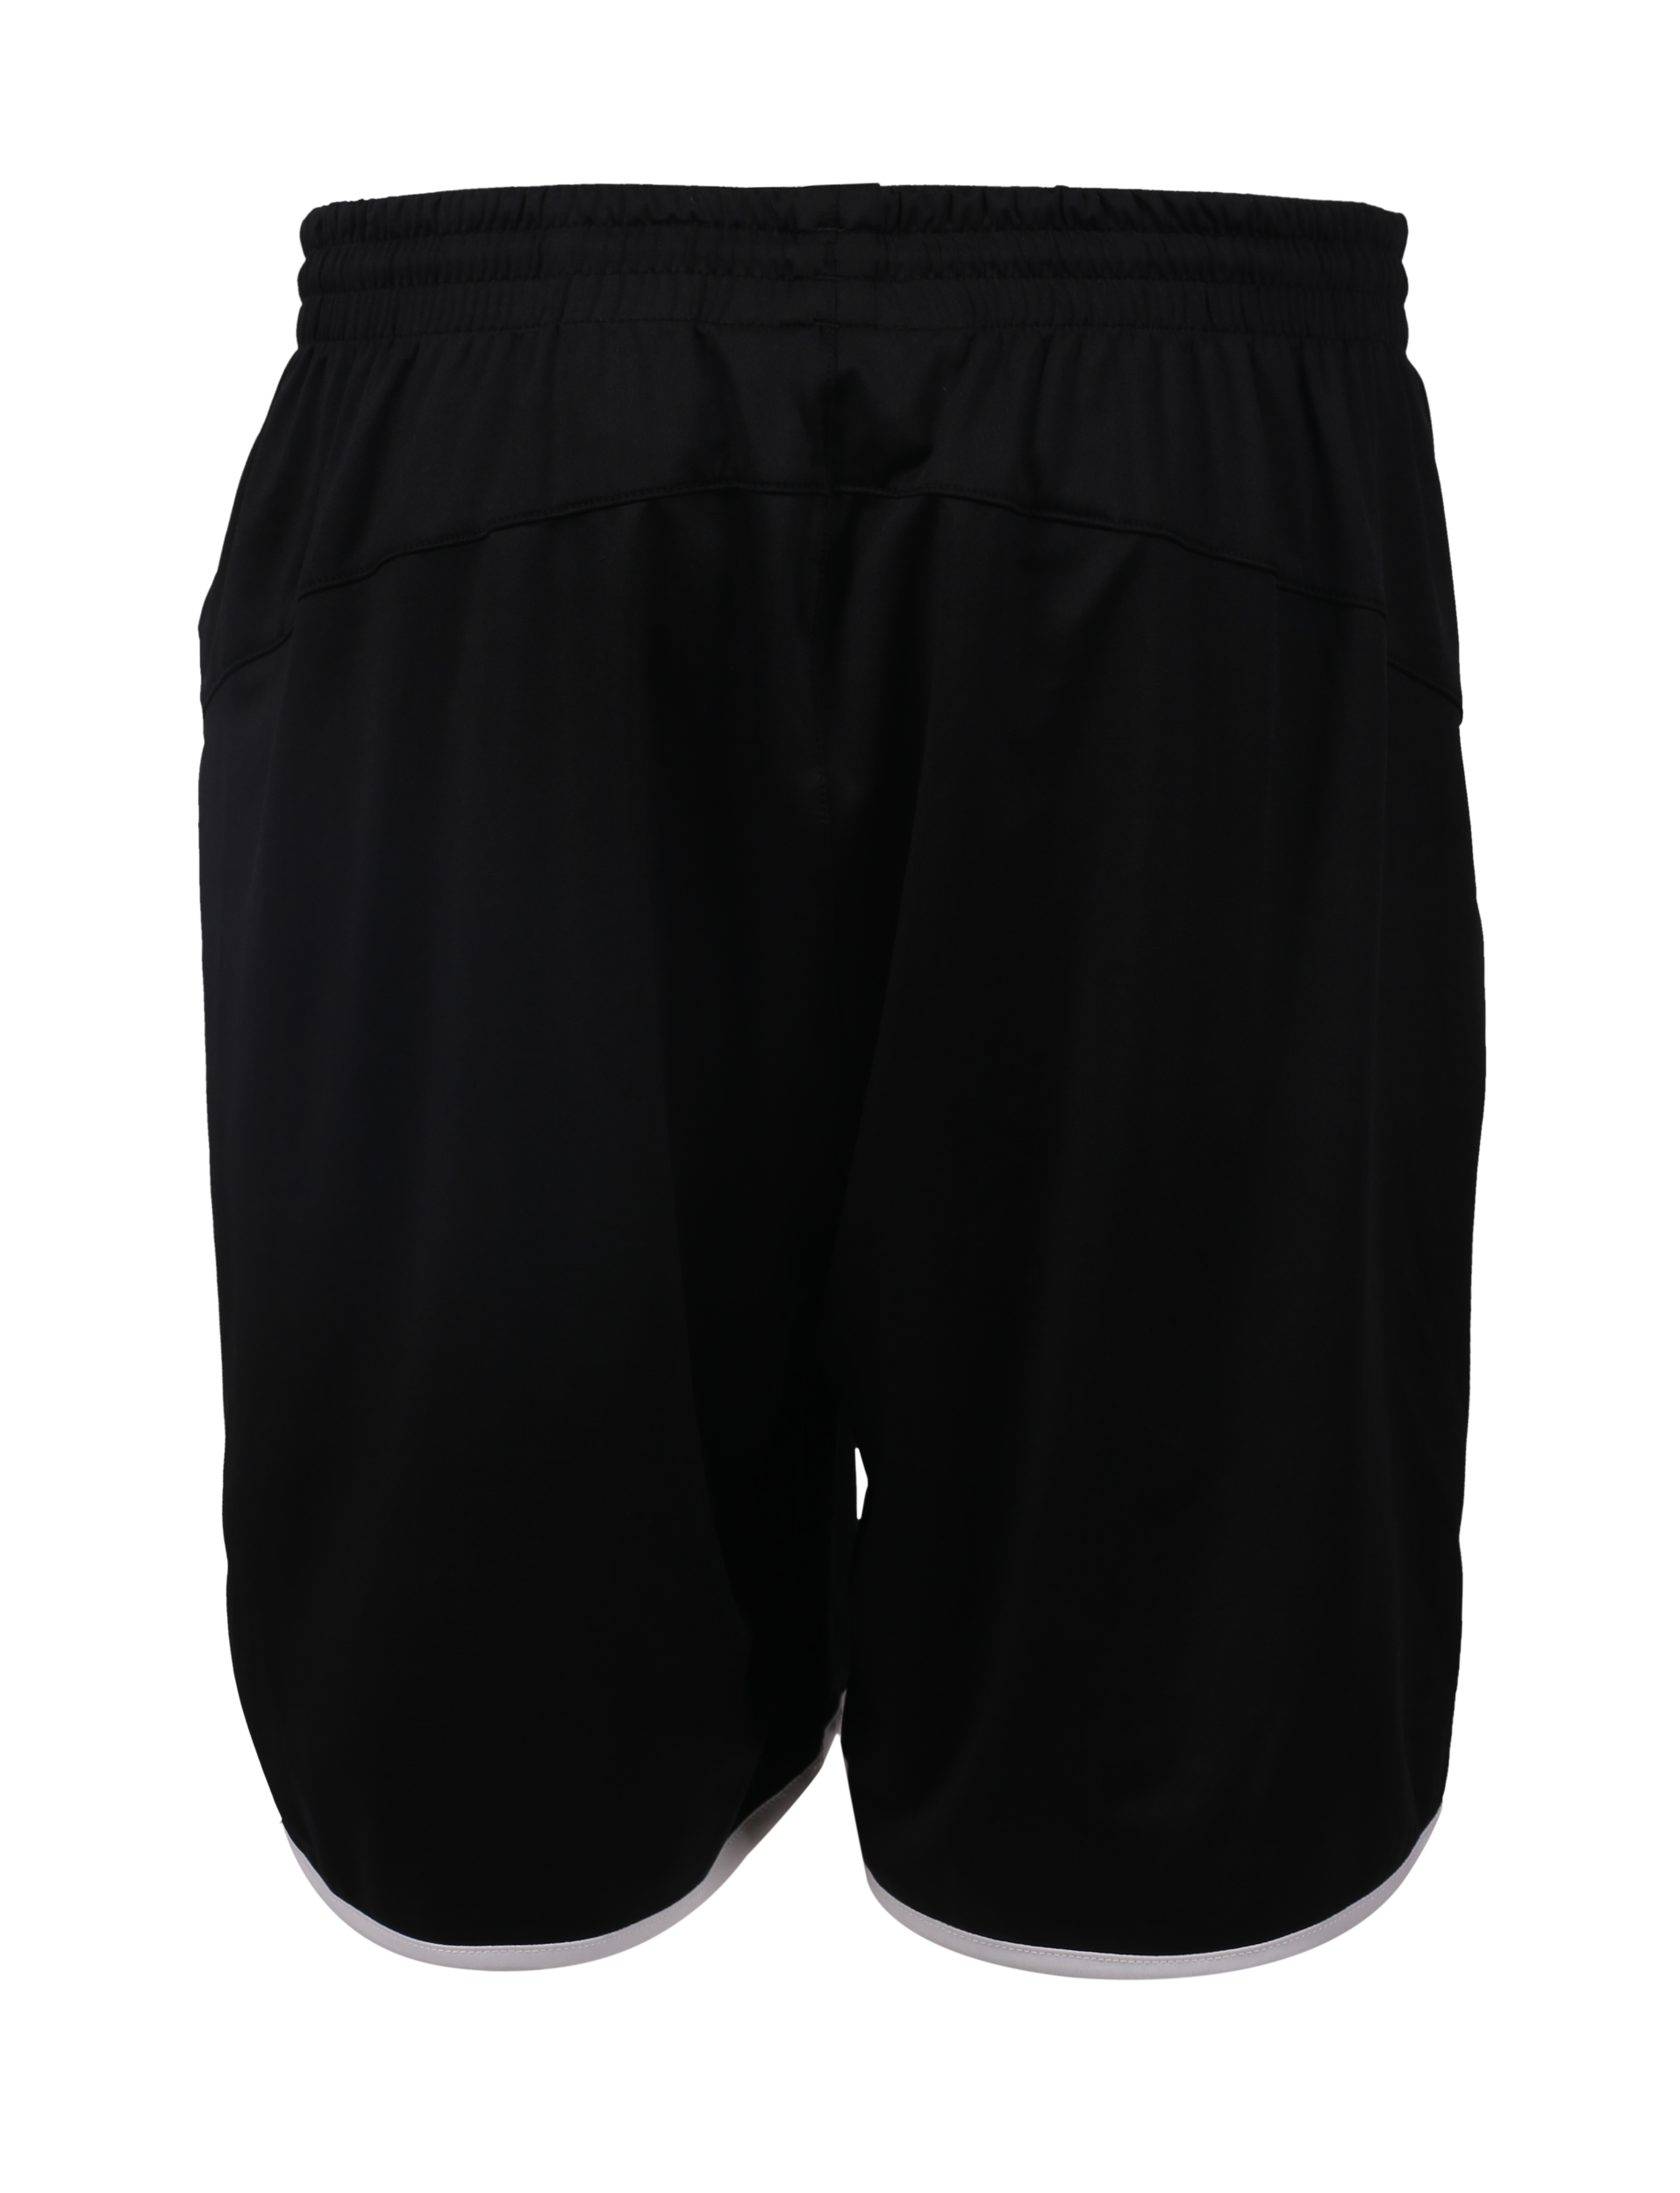 Find the Best FZ FORZA Hook Badminton Shorts | Shop Now – Cappella Sports